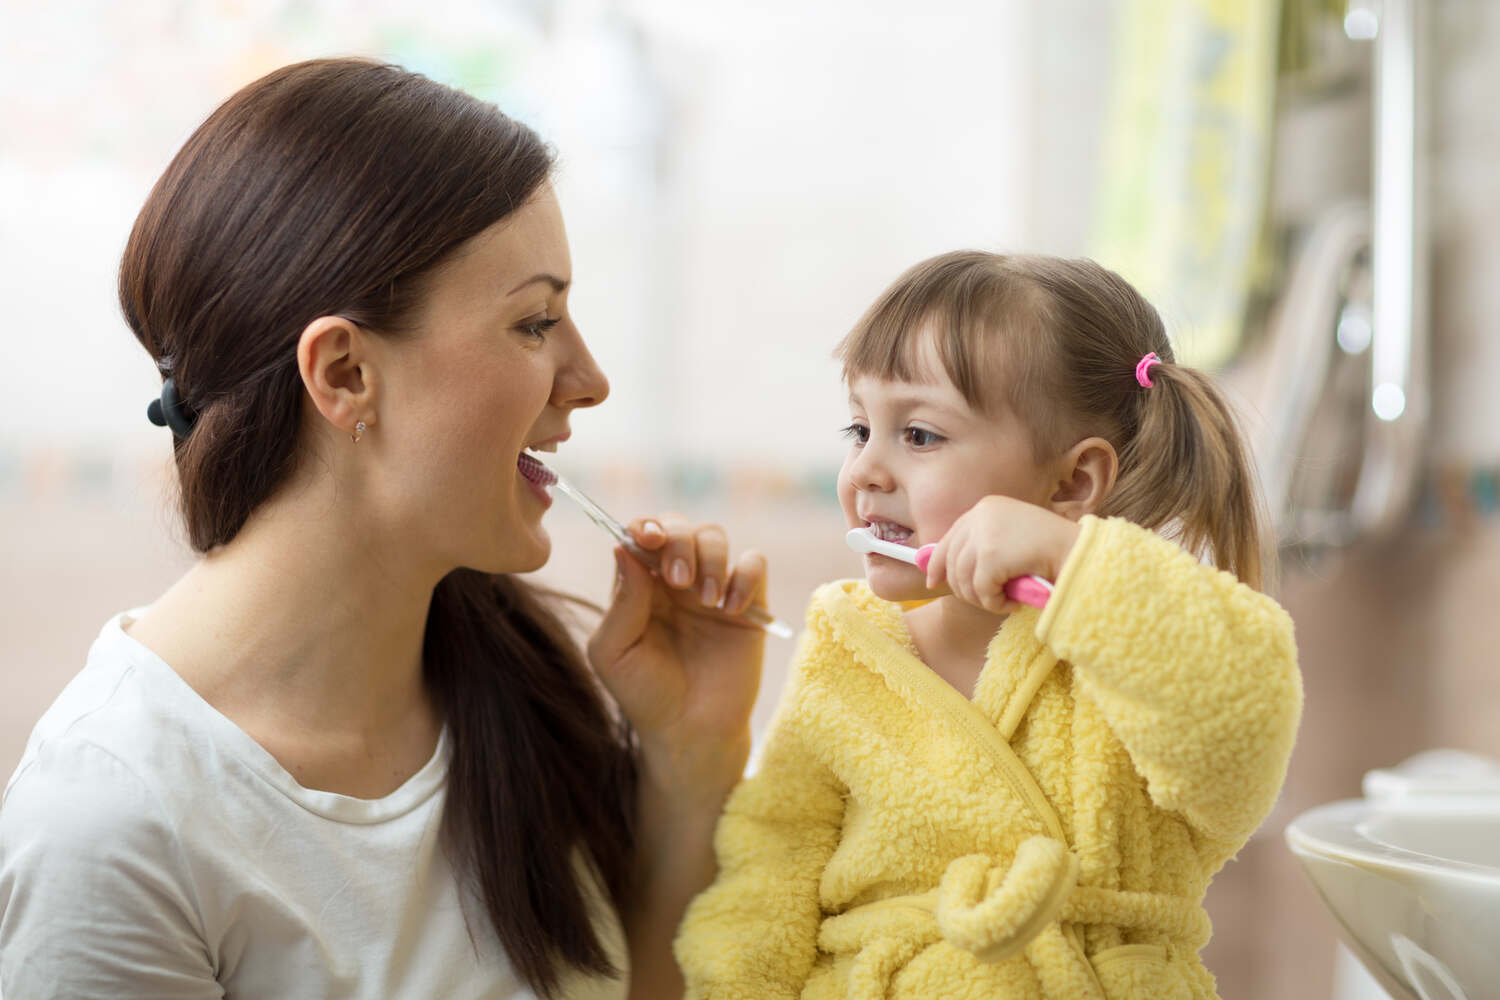 Maintaining good oral hygiene helps to prevent tooth decay in kids